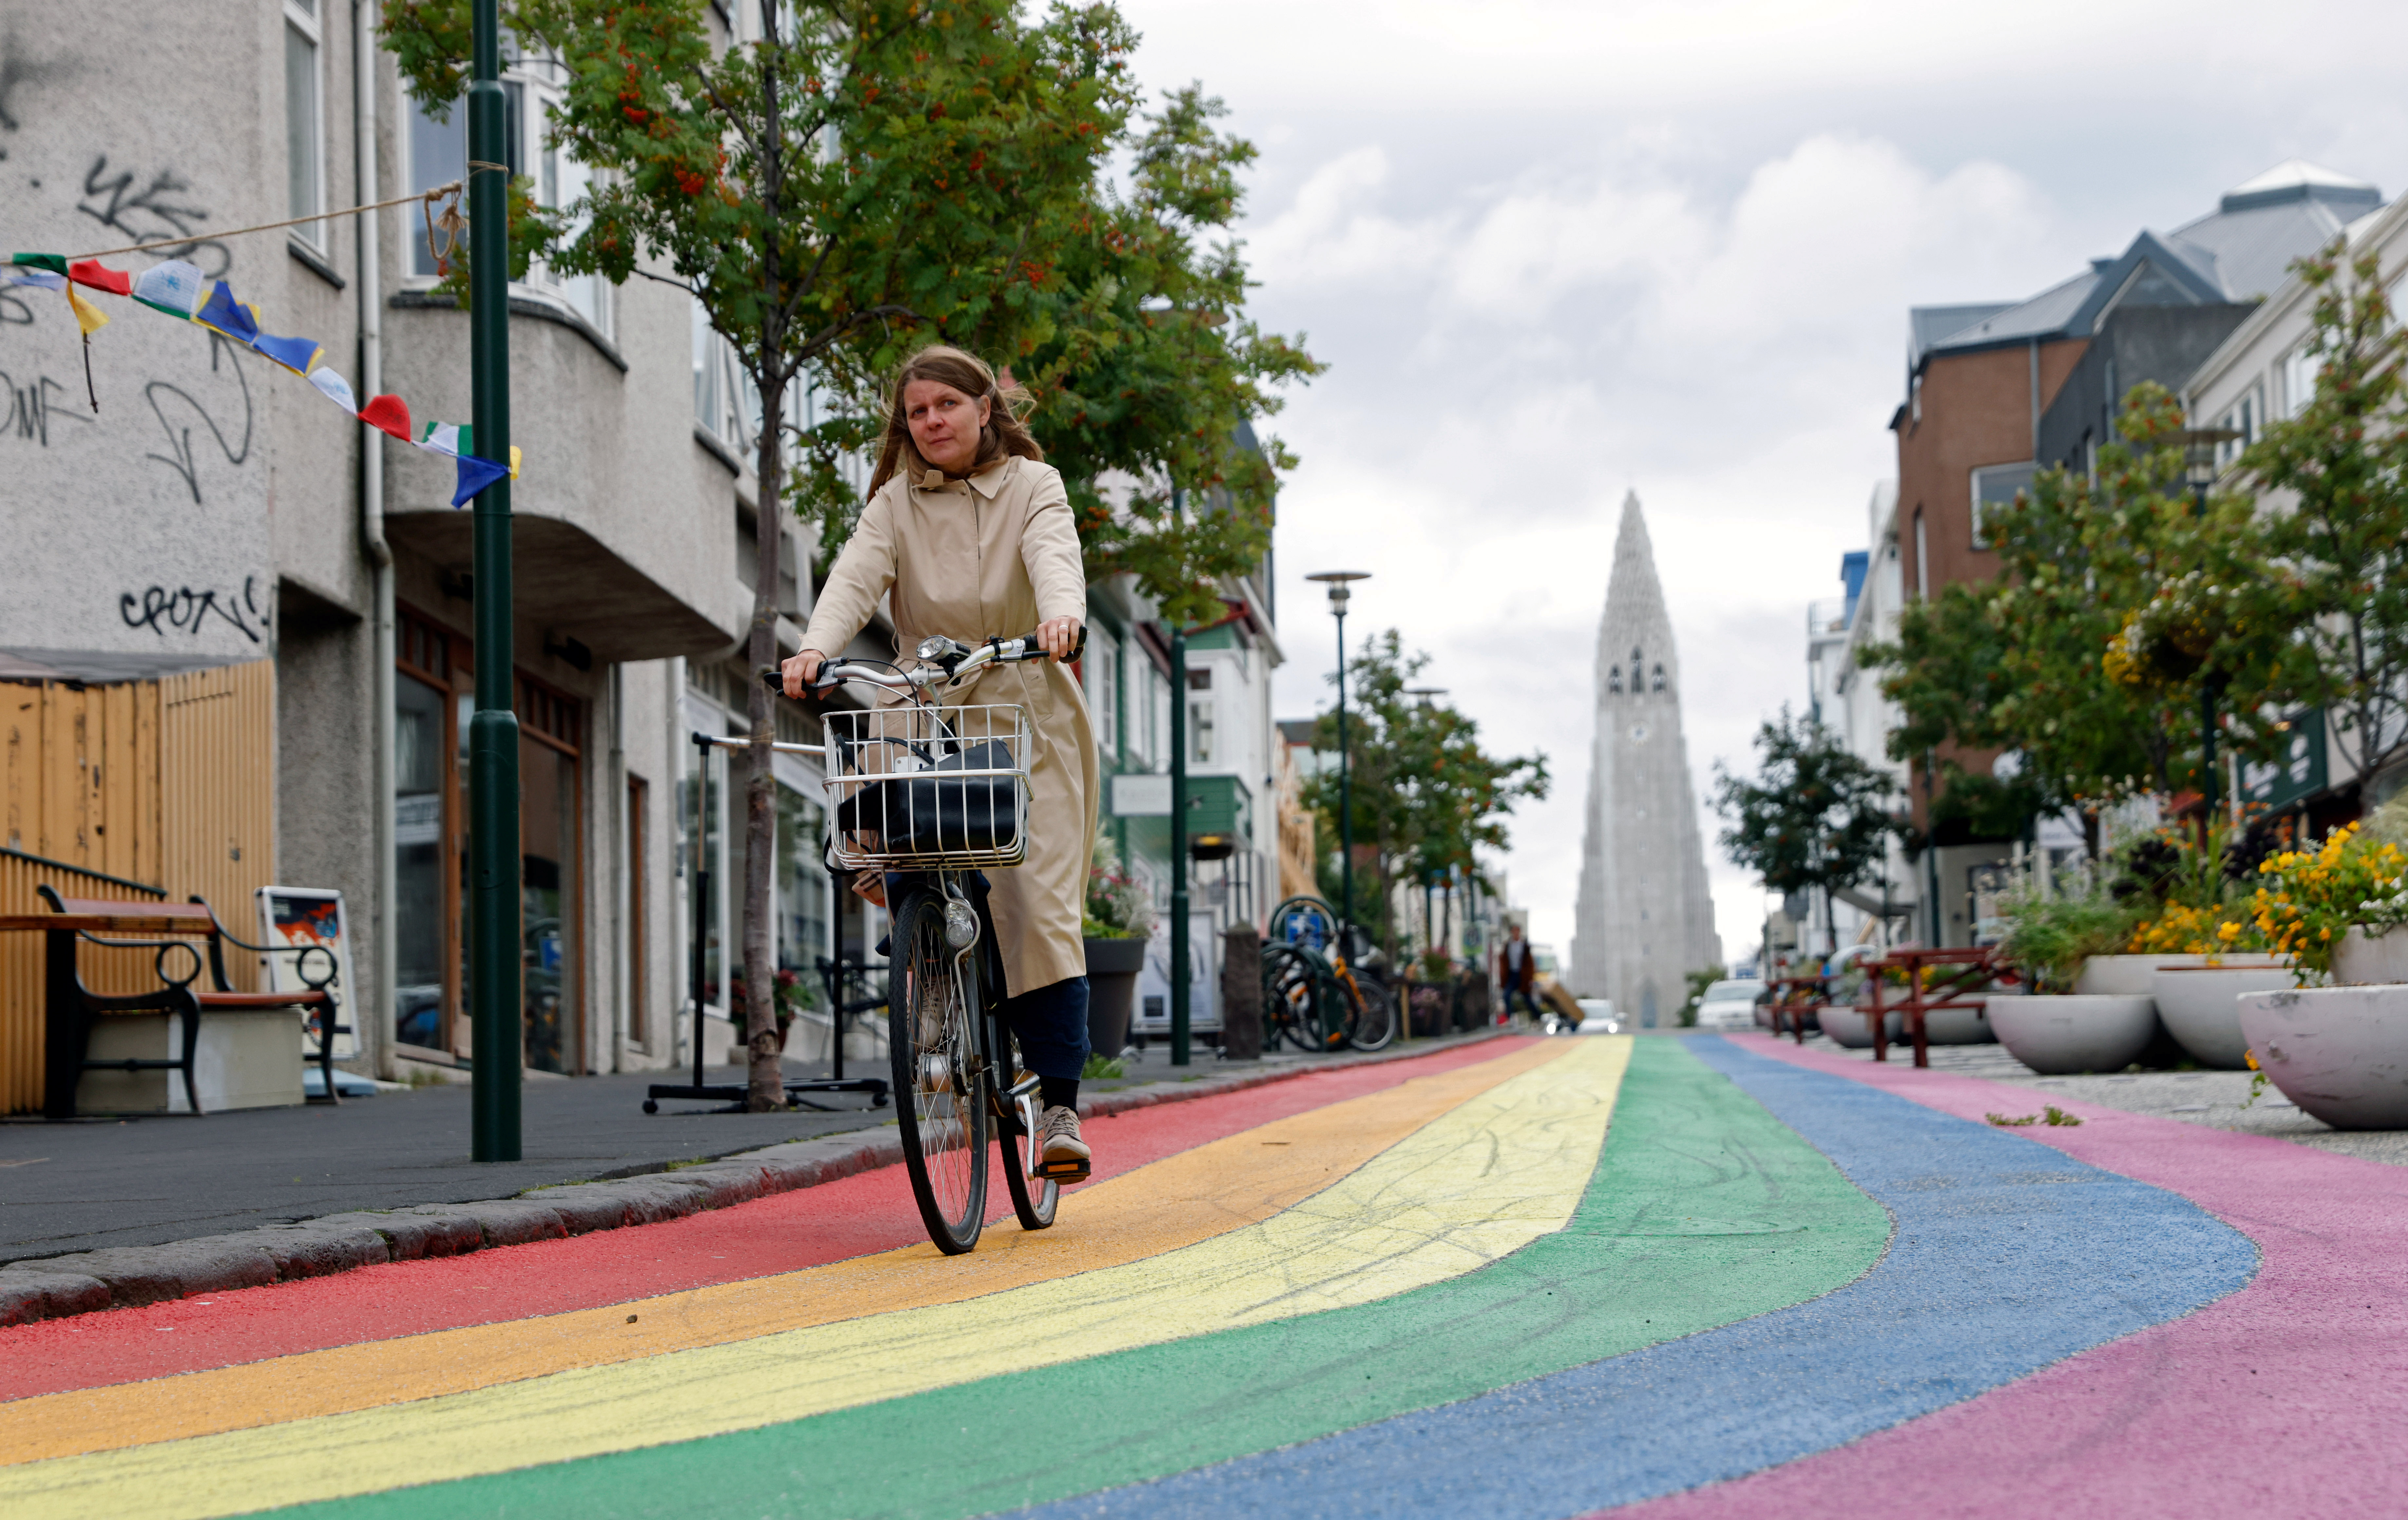 A woman cycles down a street painted in rainbow colours near the Hallgrimskirkja church, as the outbreak of the coronavirus disease (COVID-19) continues, in Reykjavik